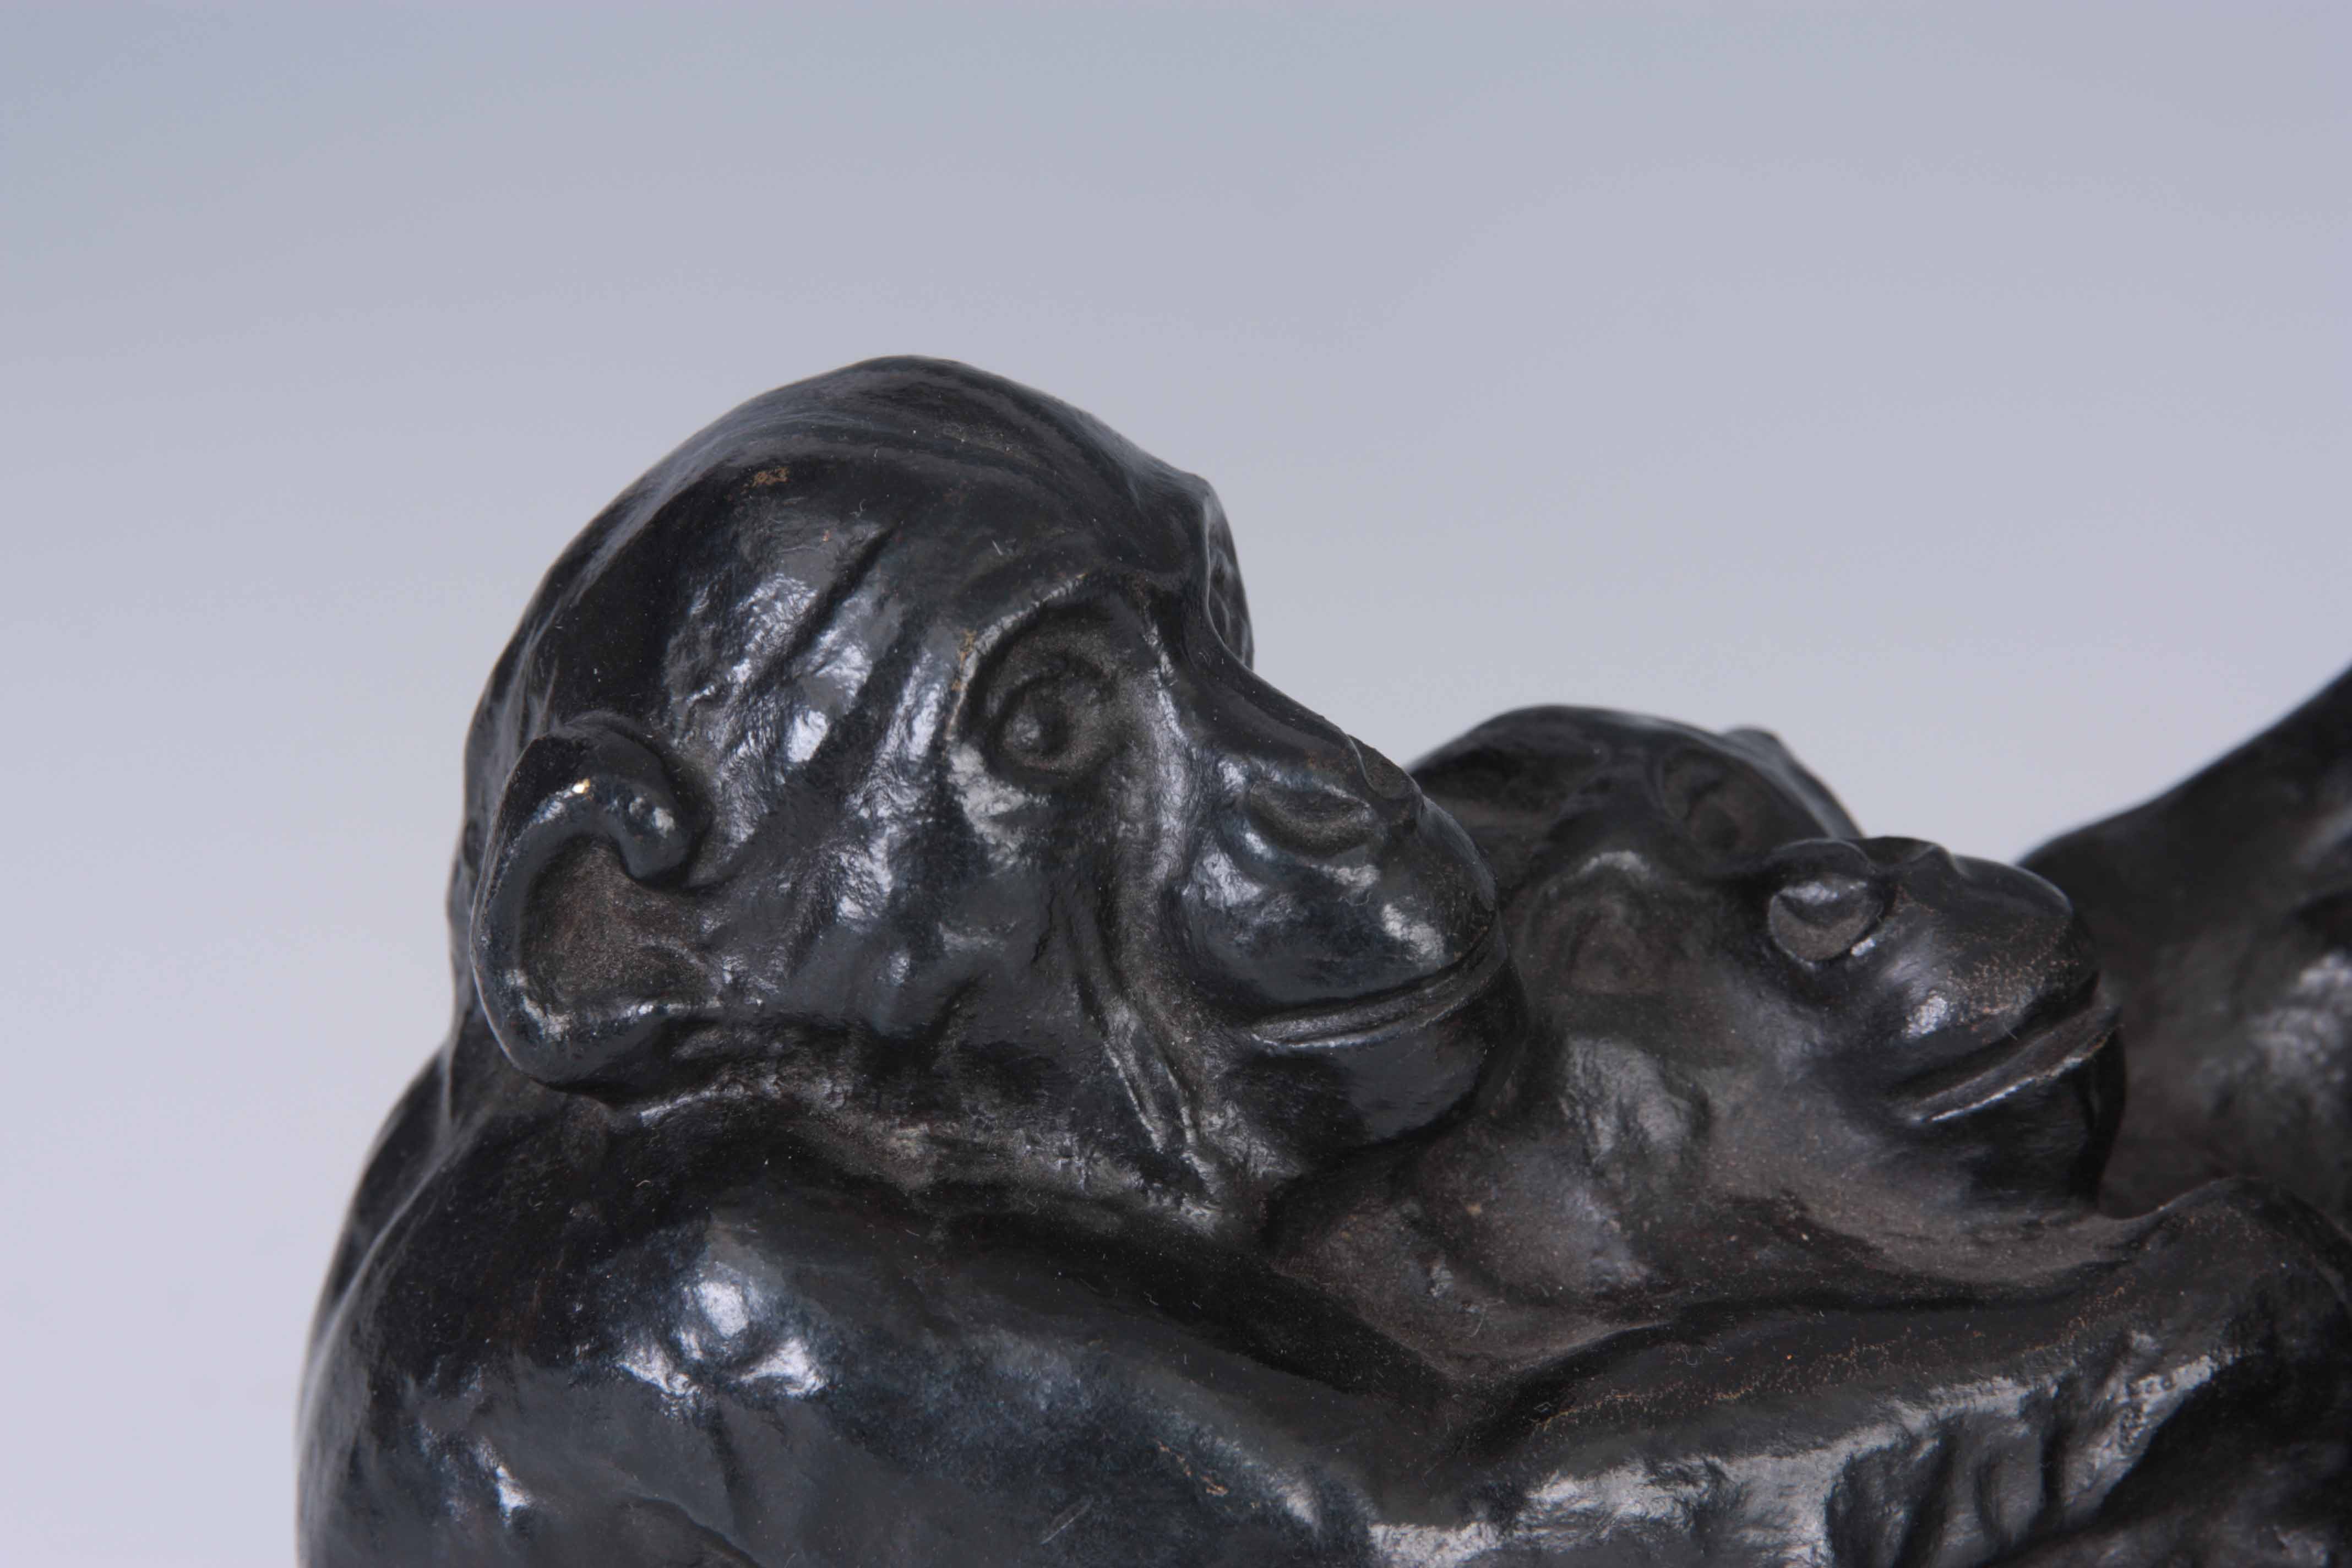 IRENEE RENE RICHARD. A 1930's FRENCH PATINATED BRONZE SCULPTURE modelled as two playful monkeys - Image 2 of 9